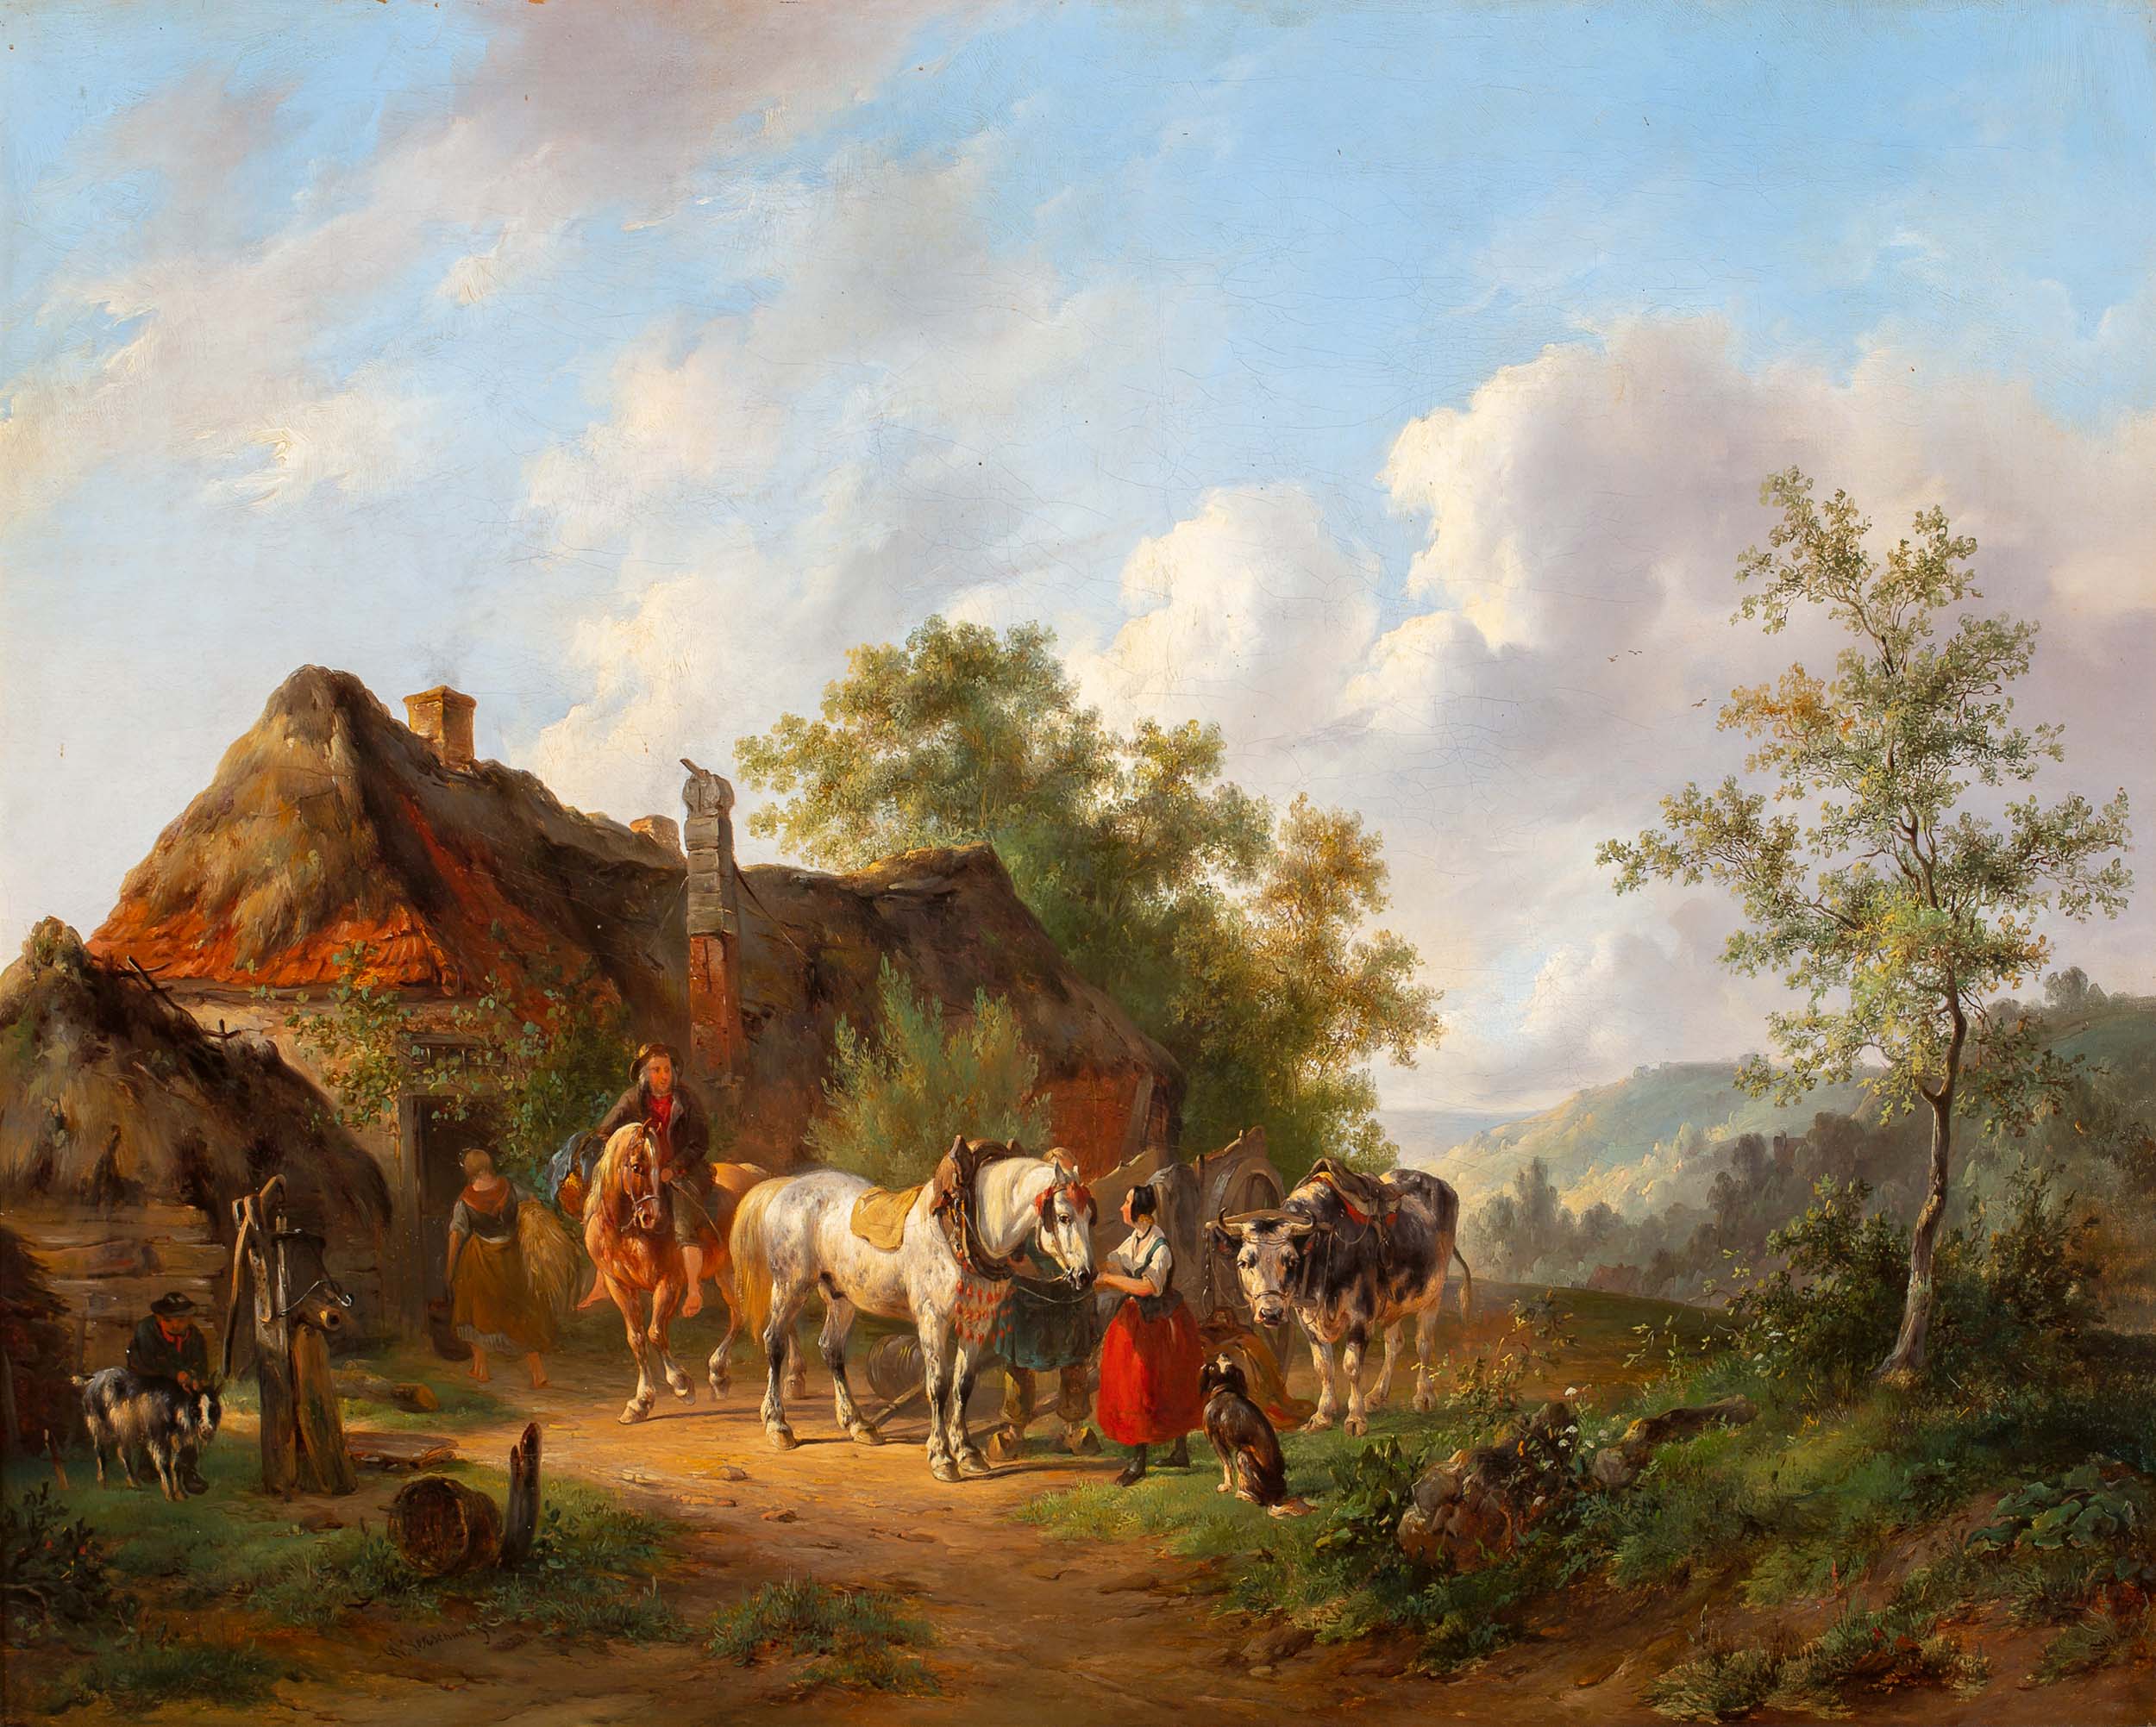 Horses and cows in front of a cottage